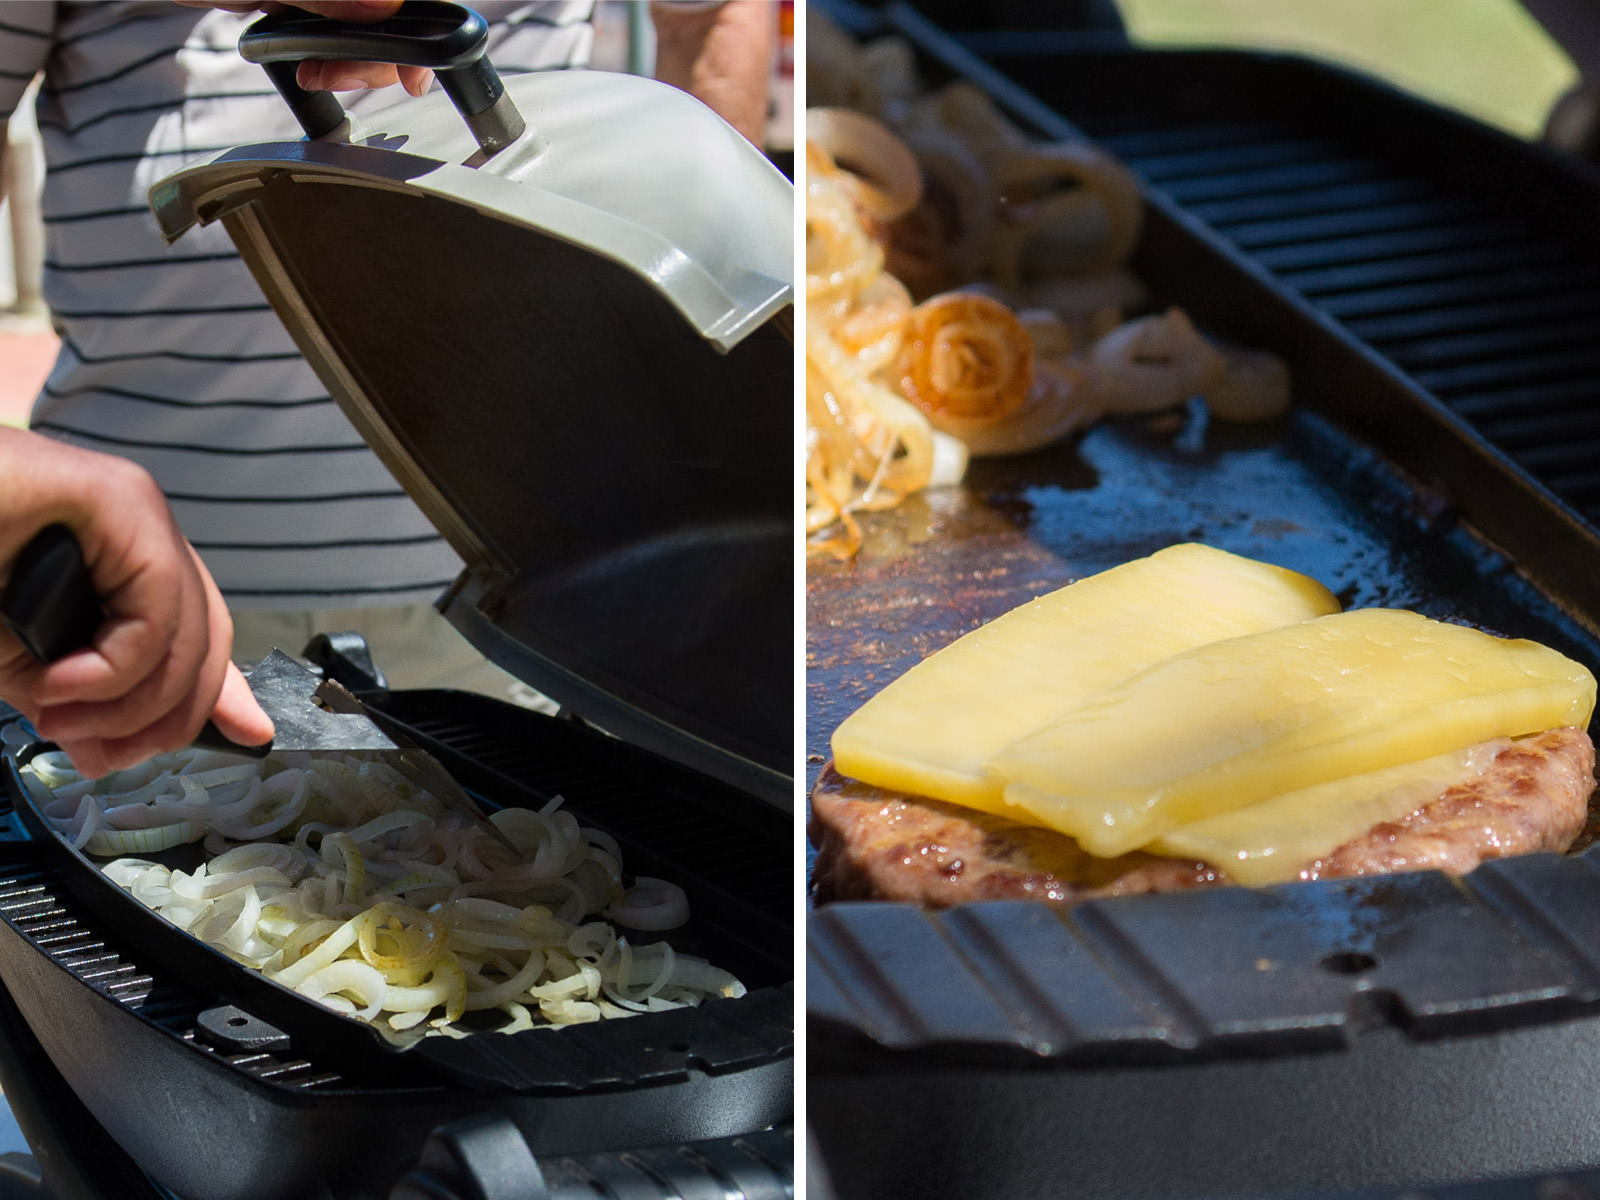 Onions and burgers topped with cheese on the barbecue